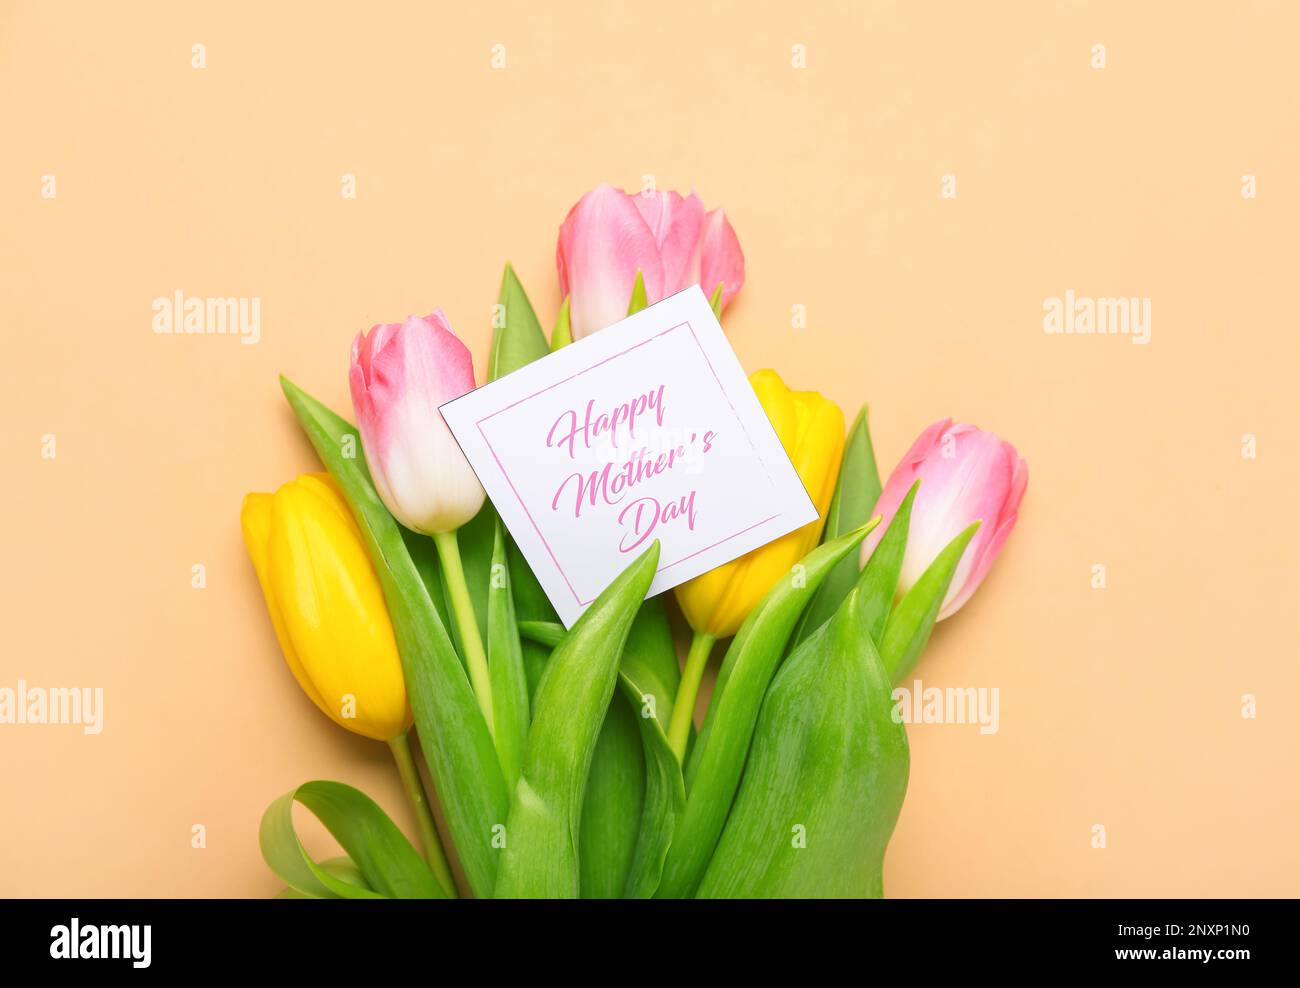 Card with text HAPPY MOTHER'S DAY and beautiful tulip flowers on ...